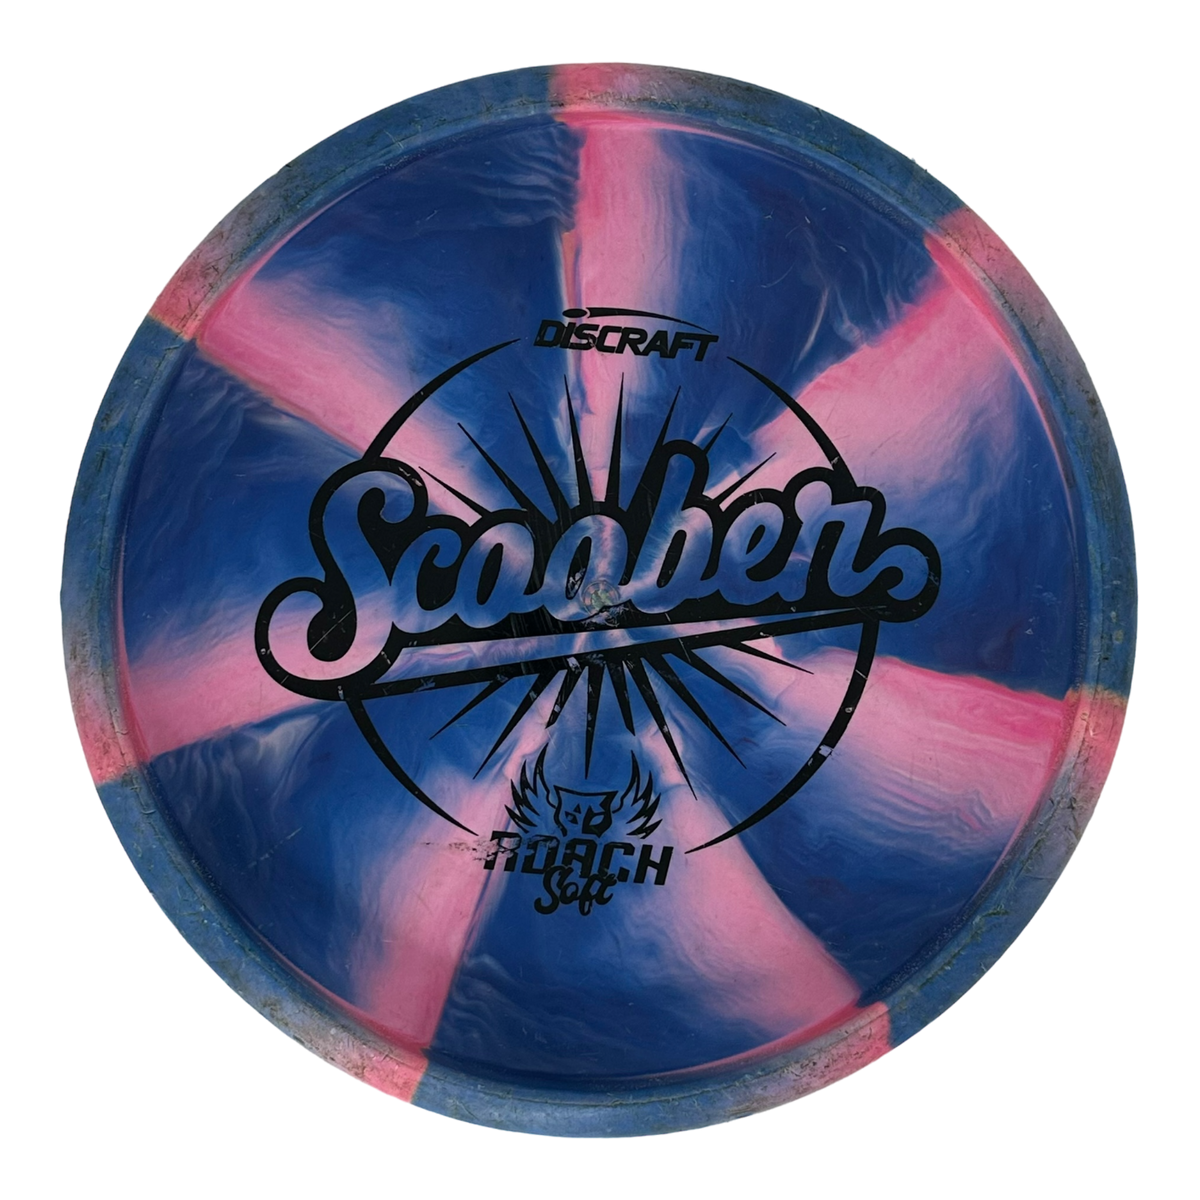 Discraft Pre-Owned